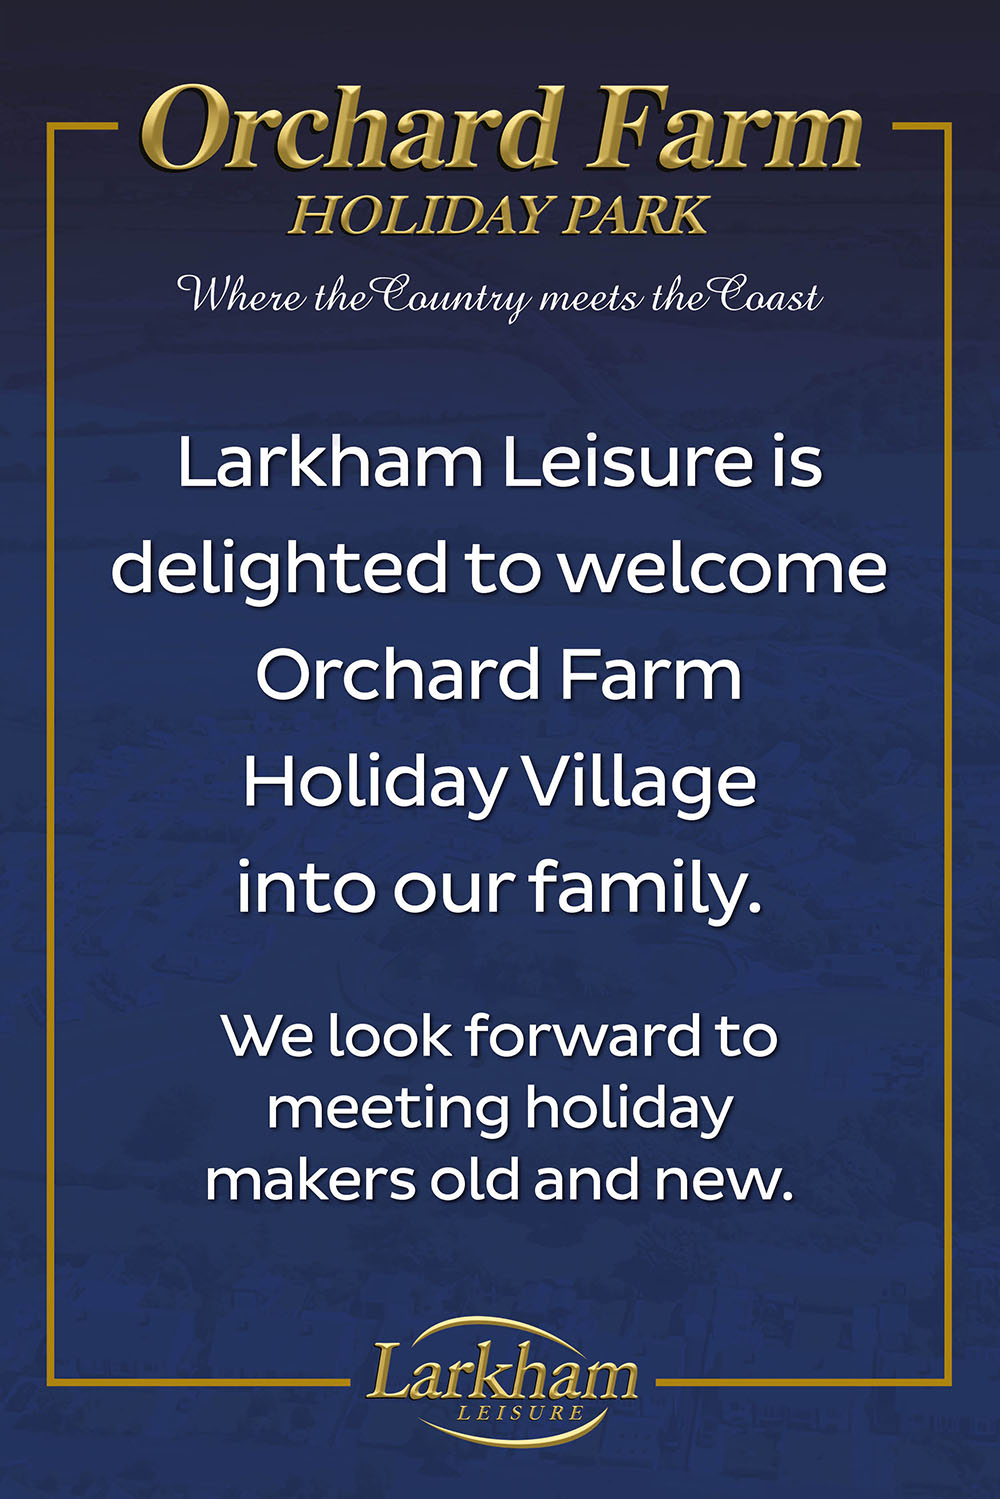 Larkham Leisure is delighted to welcome Orchard Farm Holiday Village into our family. We look forward to meeting holiday makers old and new.